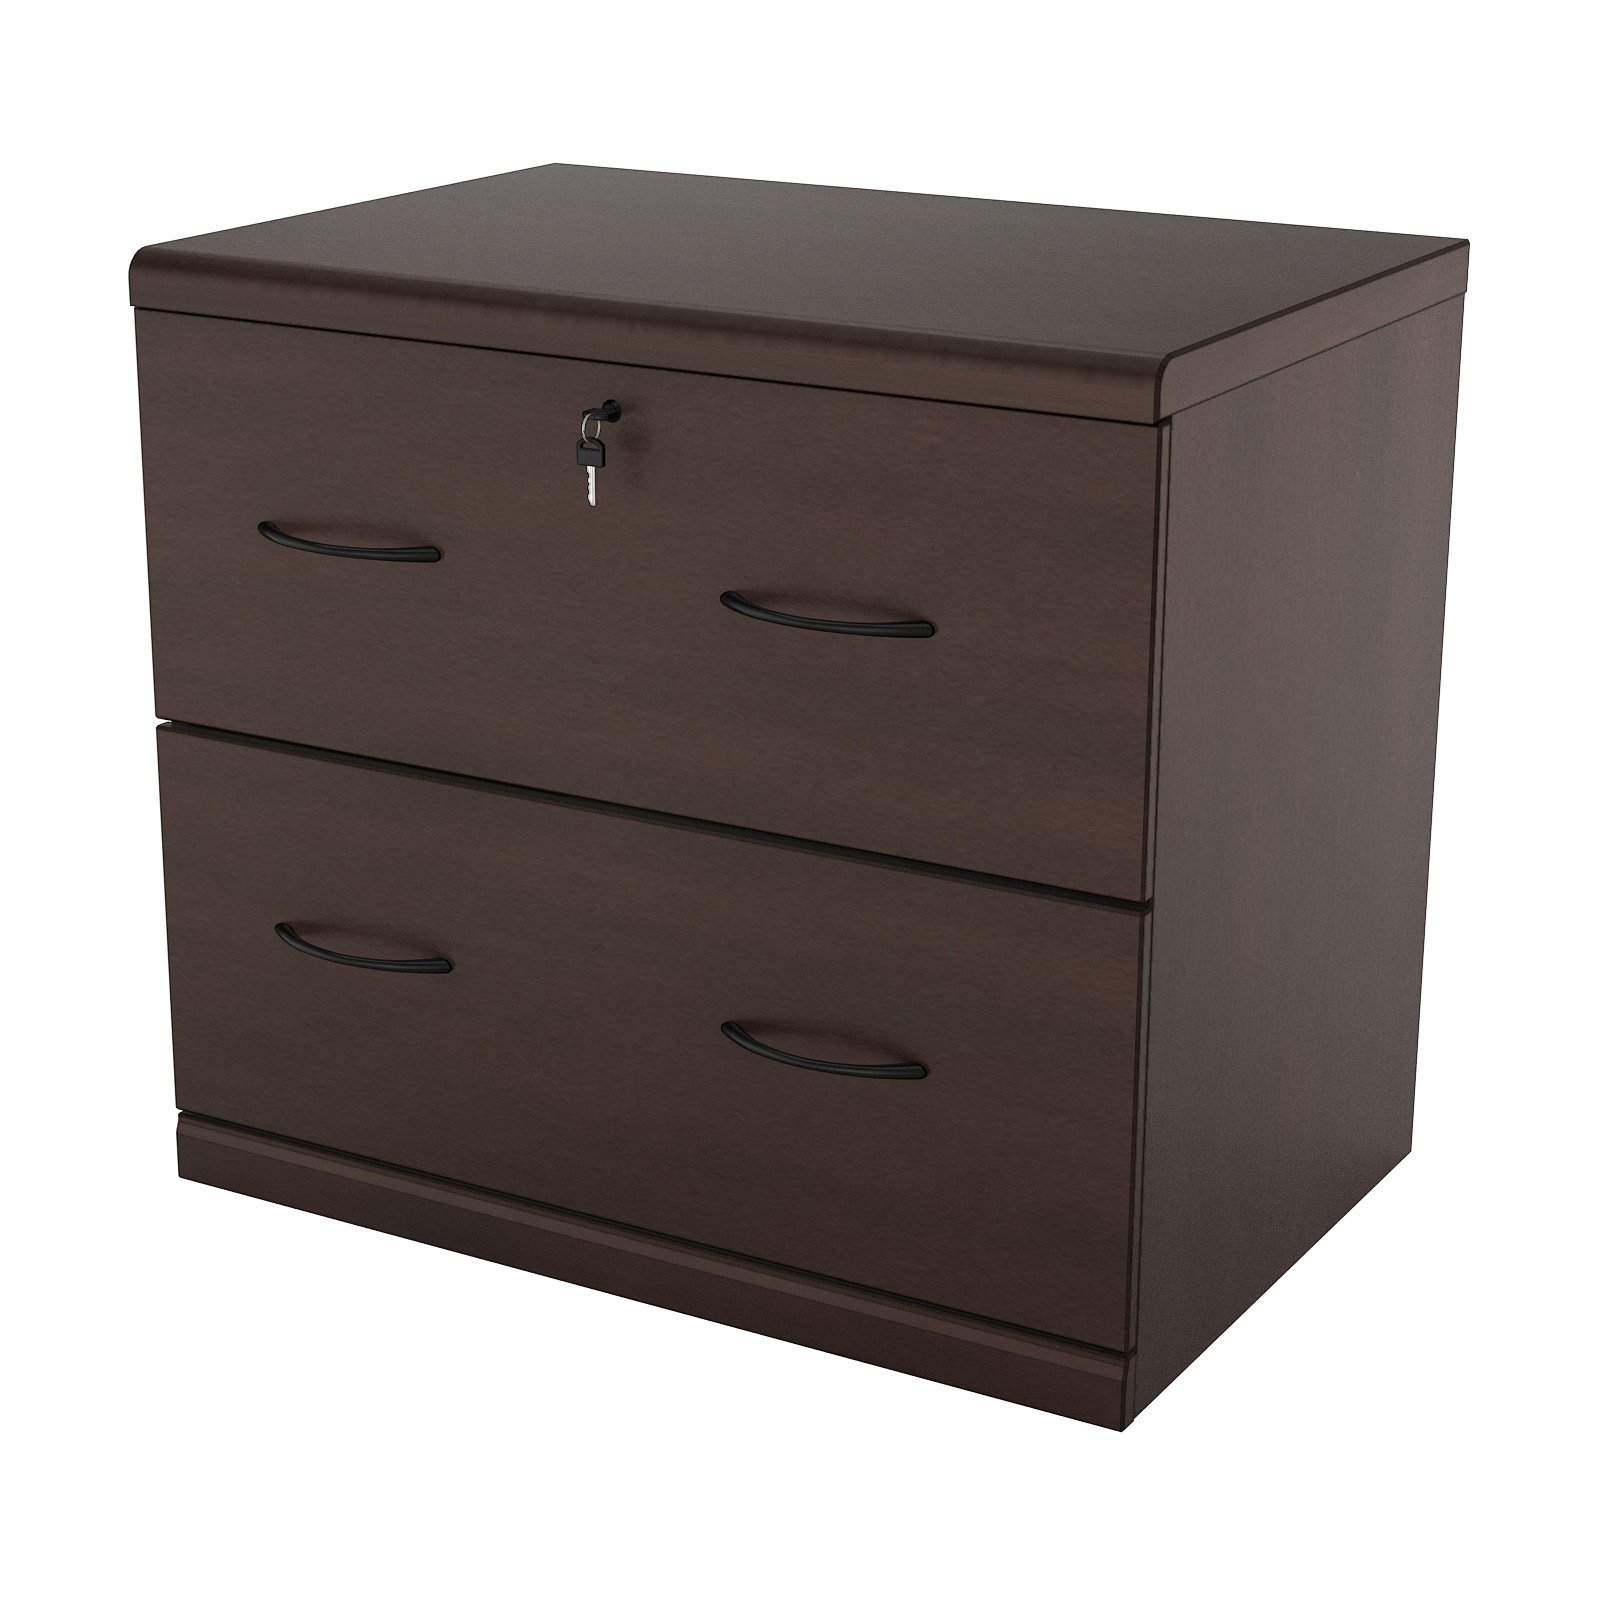 2 Drawer Lateral Wood Lockable Filing Cabinet Espresso Walmart throughout measurements 1600 X 1600